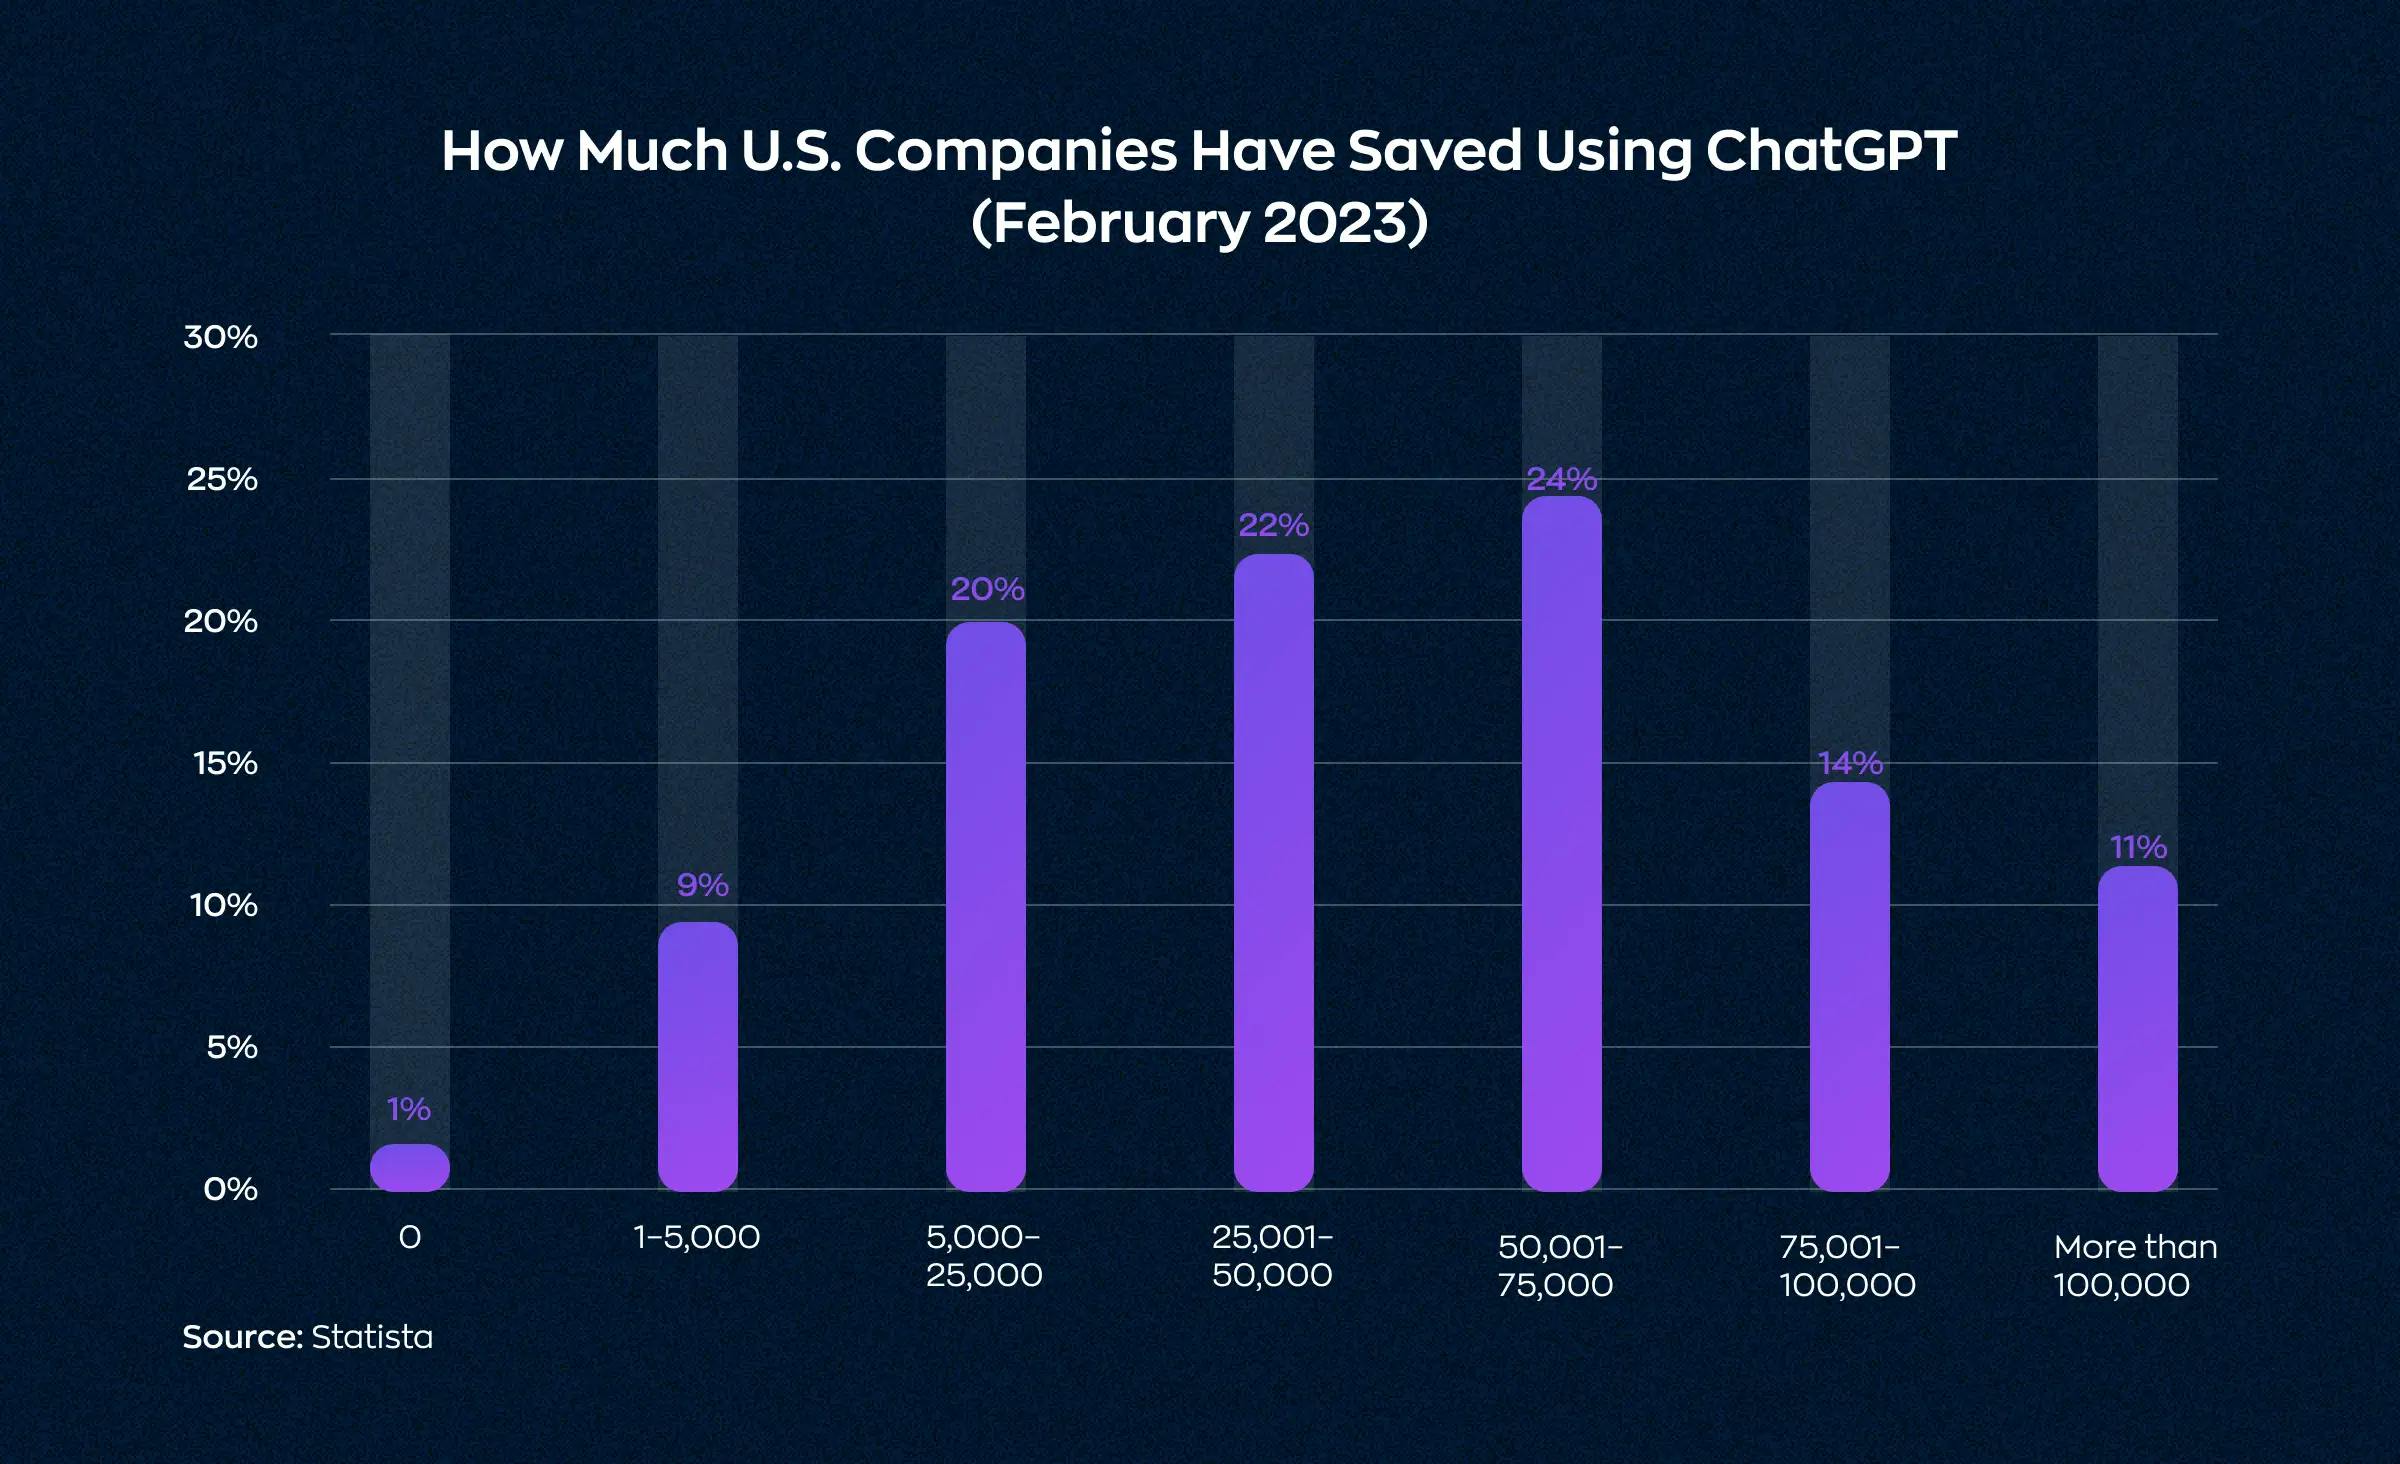 The statistics illustrate the savings that companies have achieved using GPT chat as of February 2023. A majority of companies saved around $50,001-$75,000 (24%), 22% saved $25,001-$50,000, 20% saved $5,000-$25,000, 9% saved $1-$5,000, 14% saved $75,001-$100,000, and 11% saved more than $100,000.